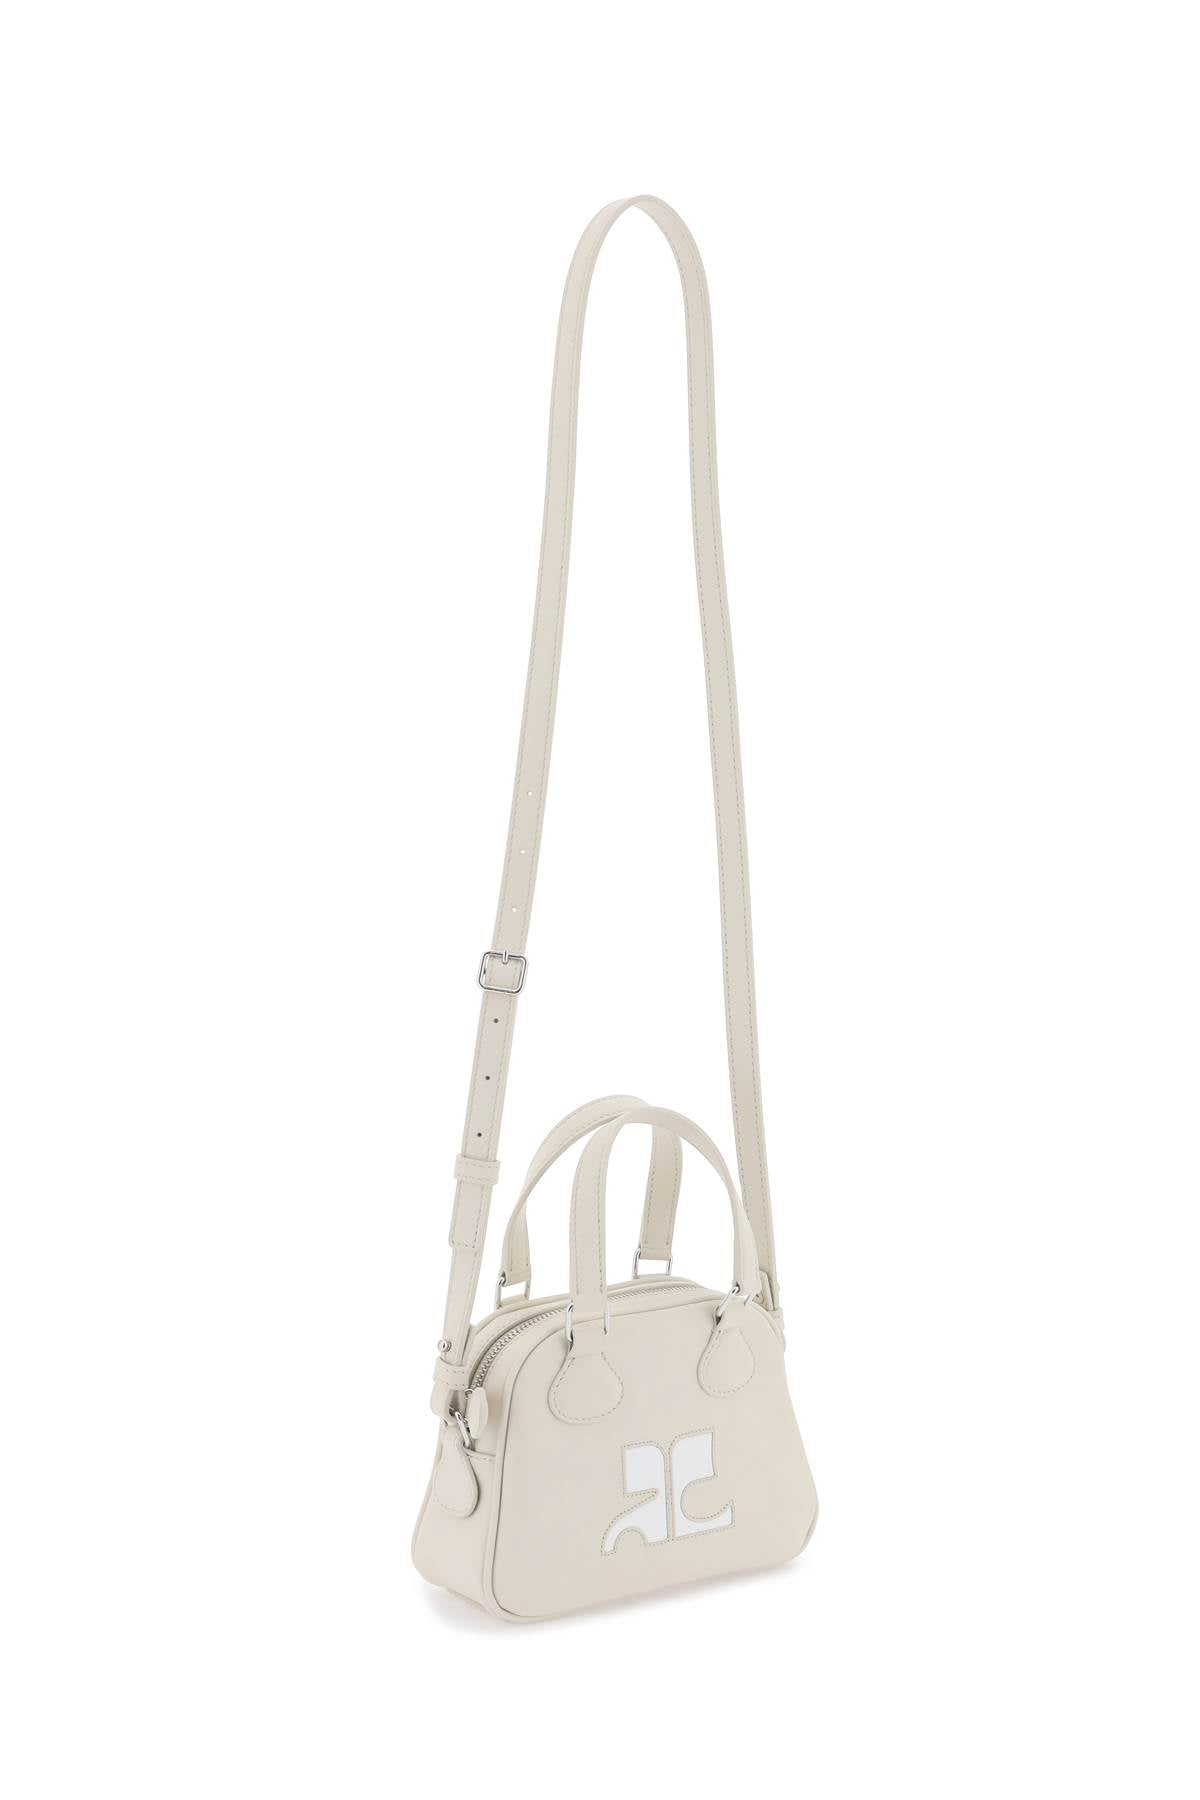 COURREGÈS Mini Trunk Gray Leather Handbag with Silver-Tone Accents and Removable Strap